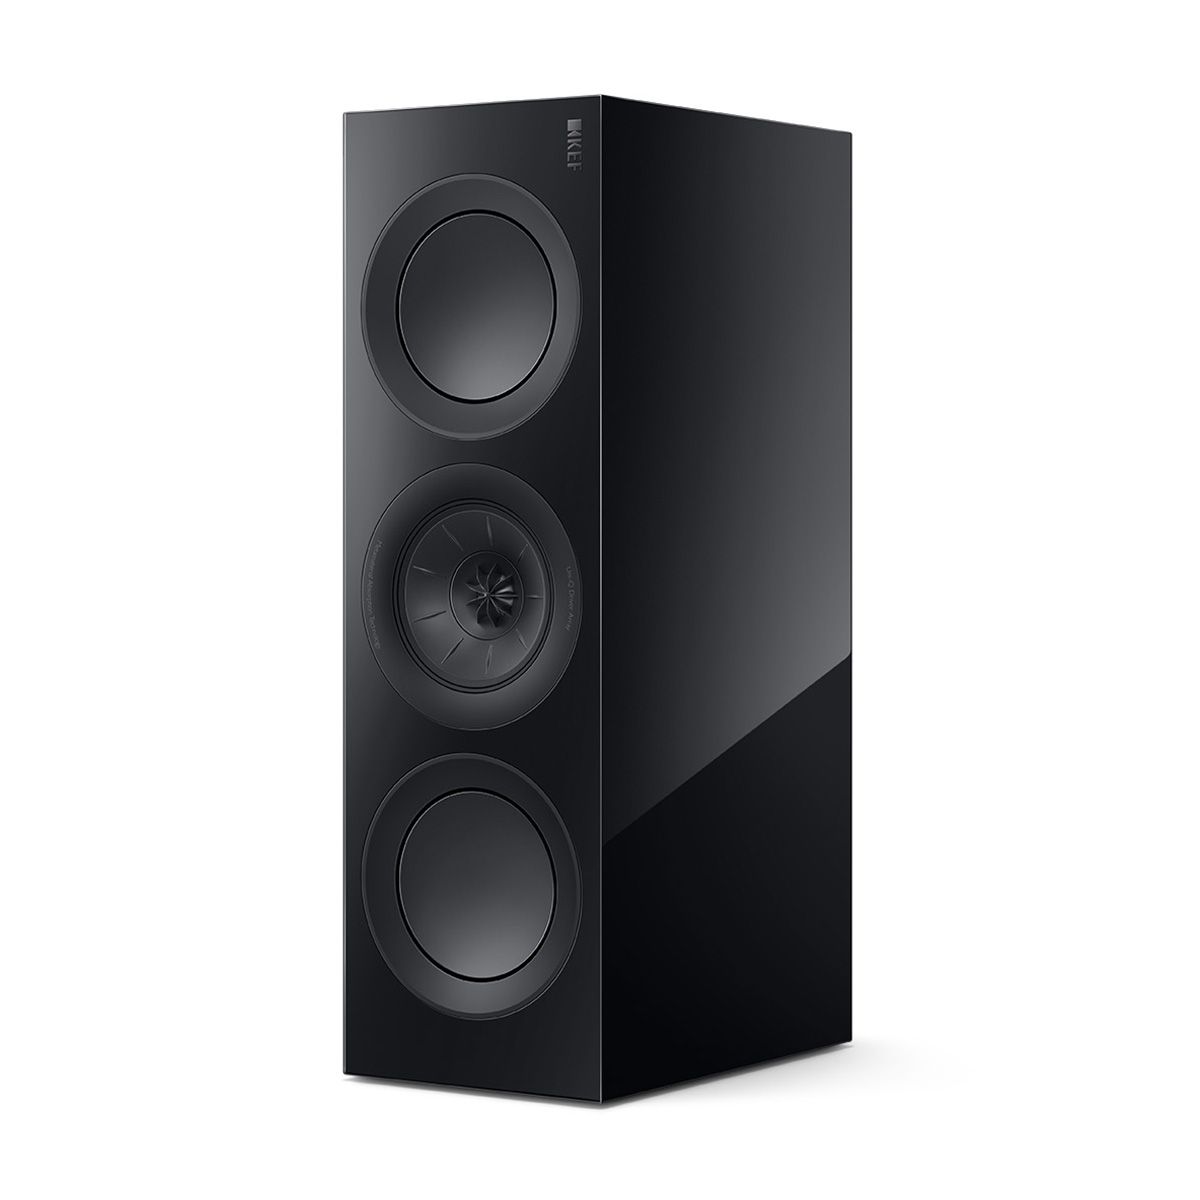 KEF R2 Meta LCR Speaker - Each black angled front view in vertical orientation without grille